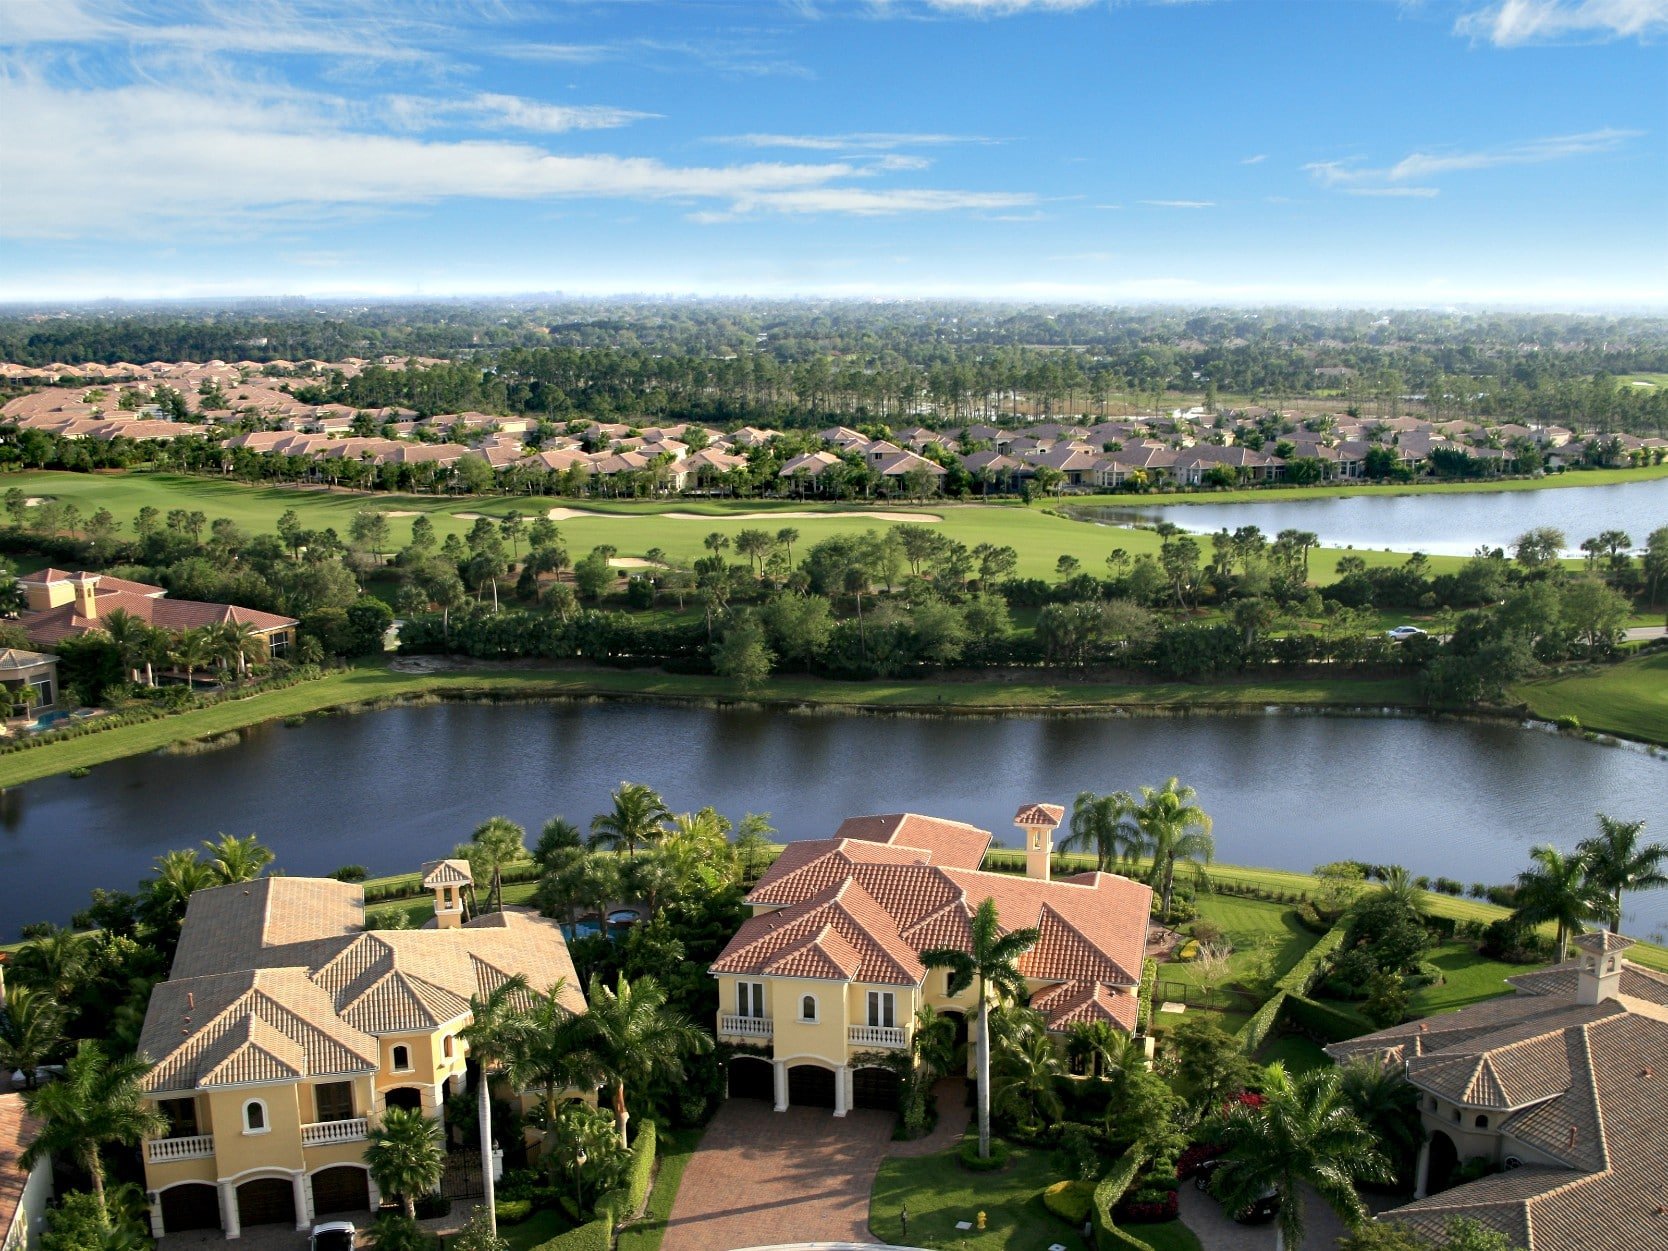 Vacation homes by the water and golf course in Venice, Florida